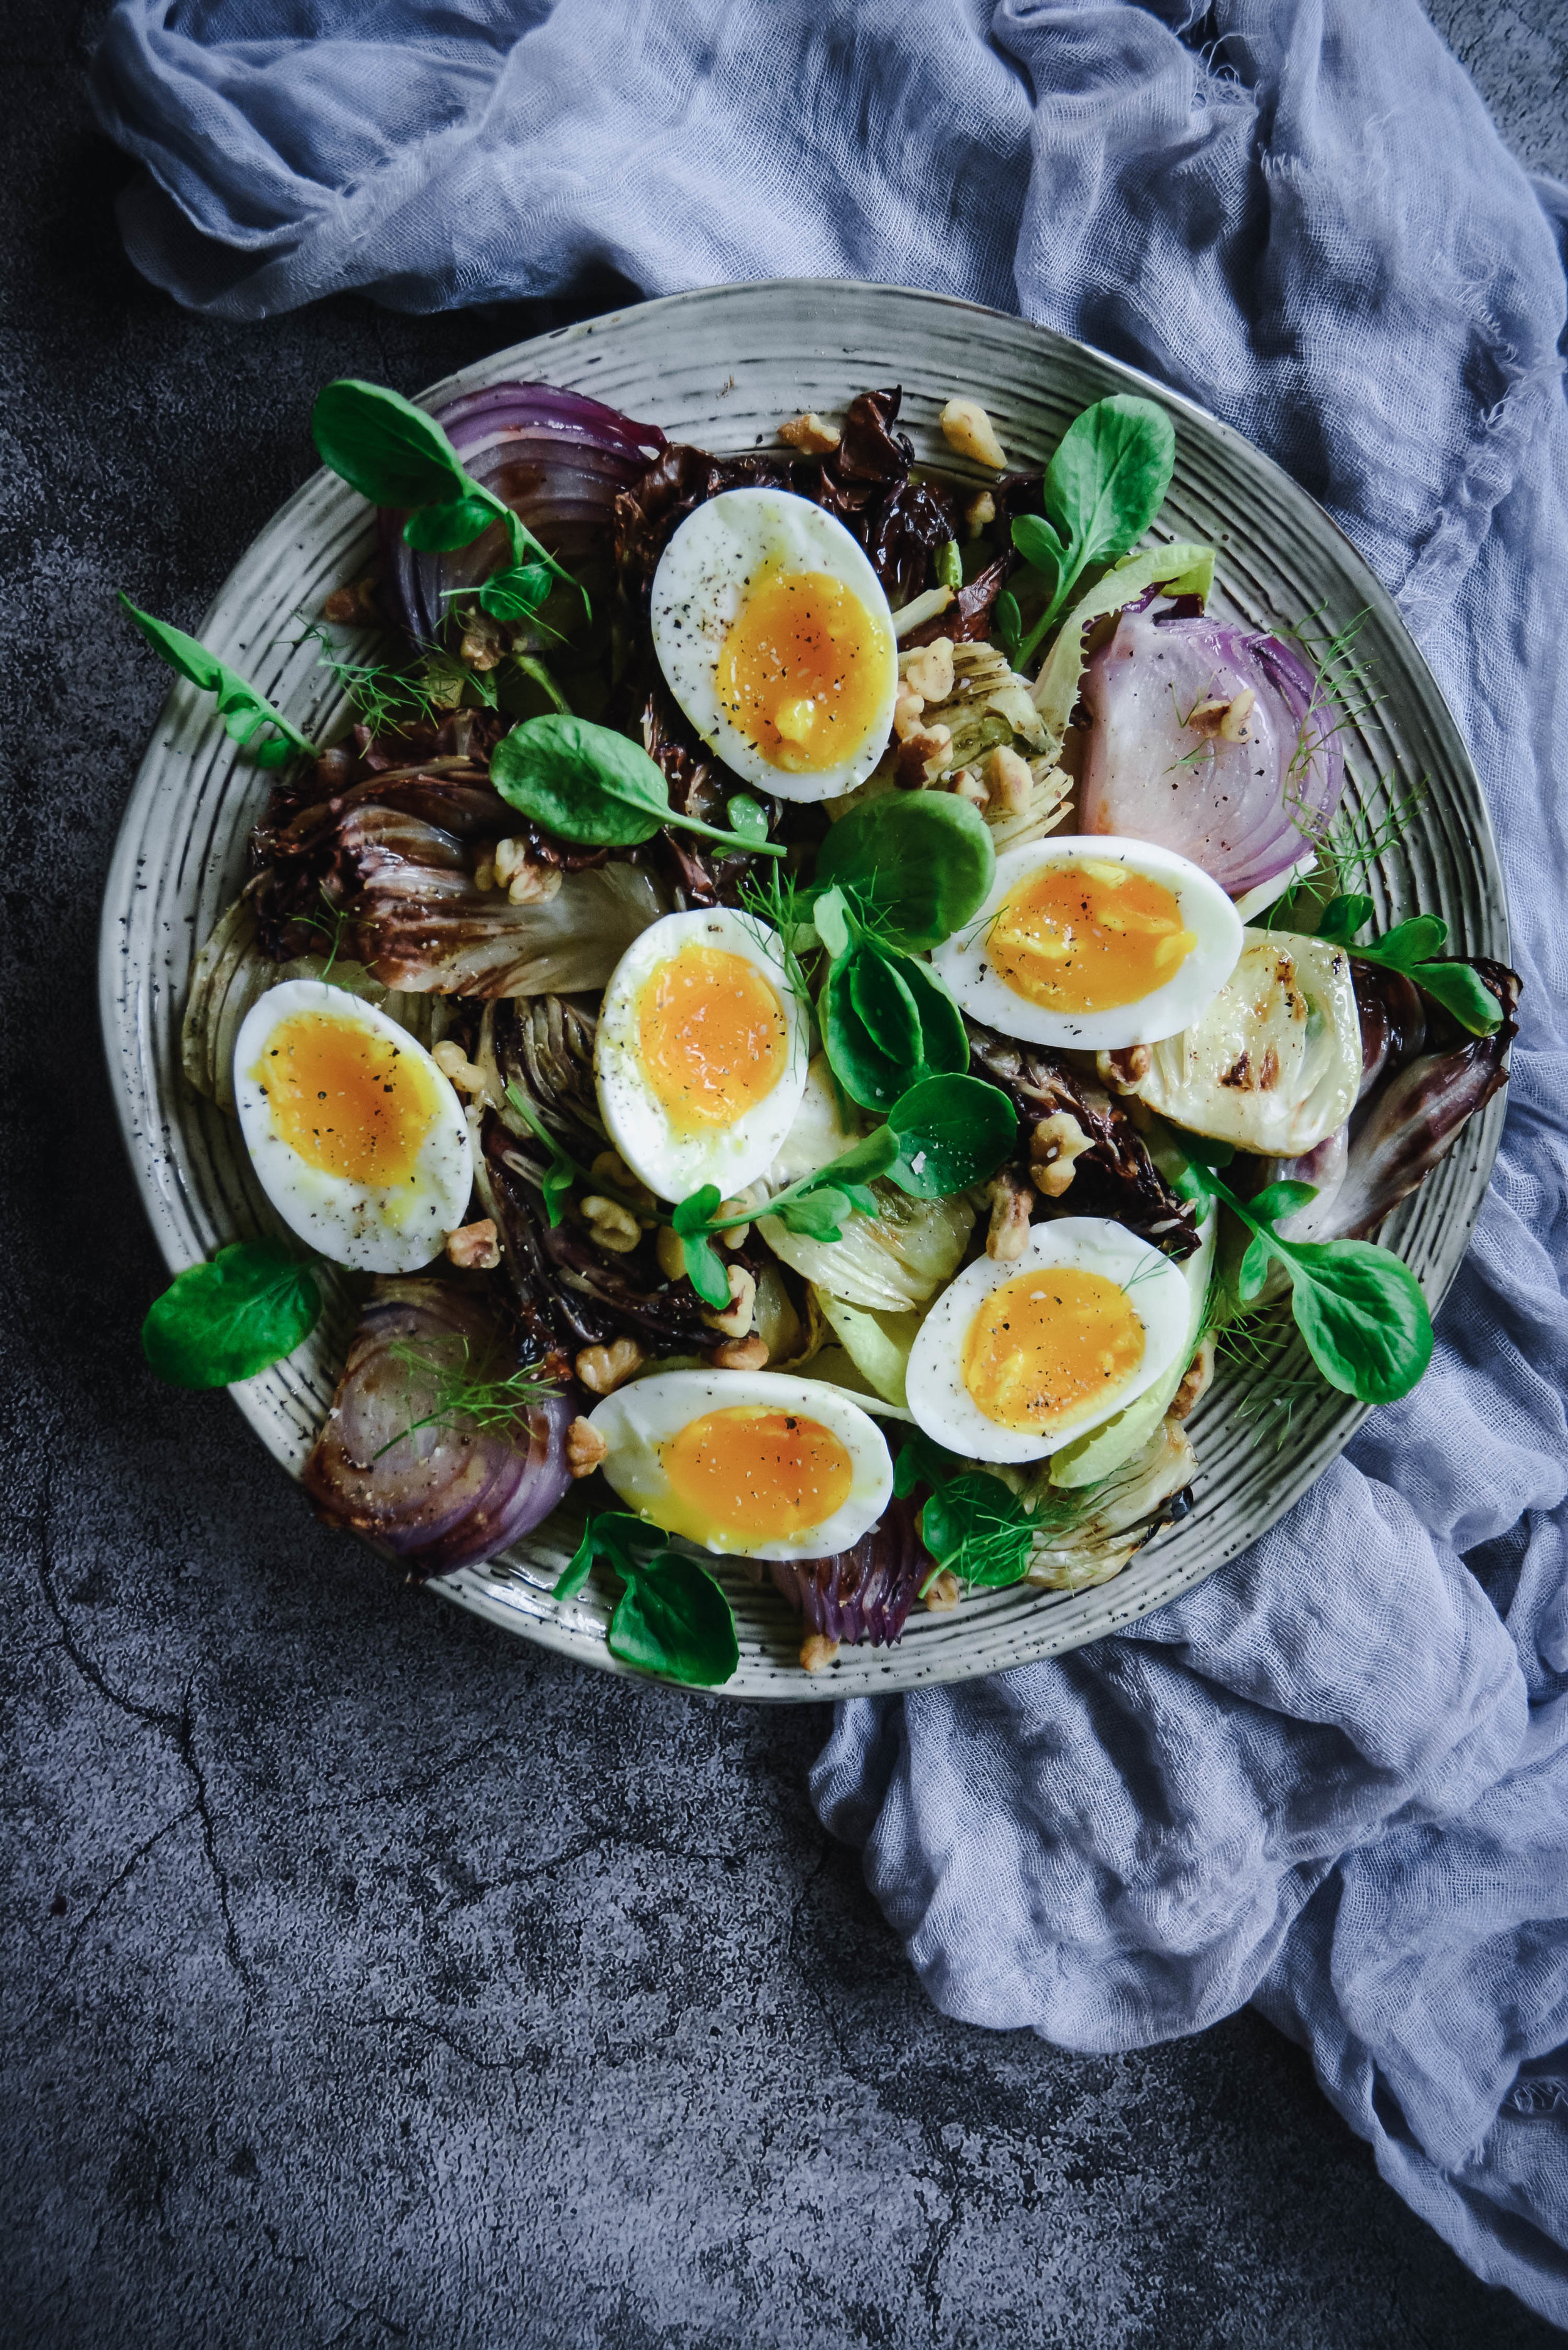  If you’re looking for a delicious salad without the lettuce, check out this grilled radicchio and fennel salad with endives, soft boiled eggs, toasted walnuts and a tangy vinaigrette. It’s simple yet delicious! #paleo #whole30 #vegetarian #calmeats #salad #radicchio #fennel #softboiledeggs #endive #whole30salad #paleosalad #saladrecipe #summerrecipe 